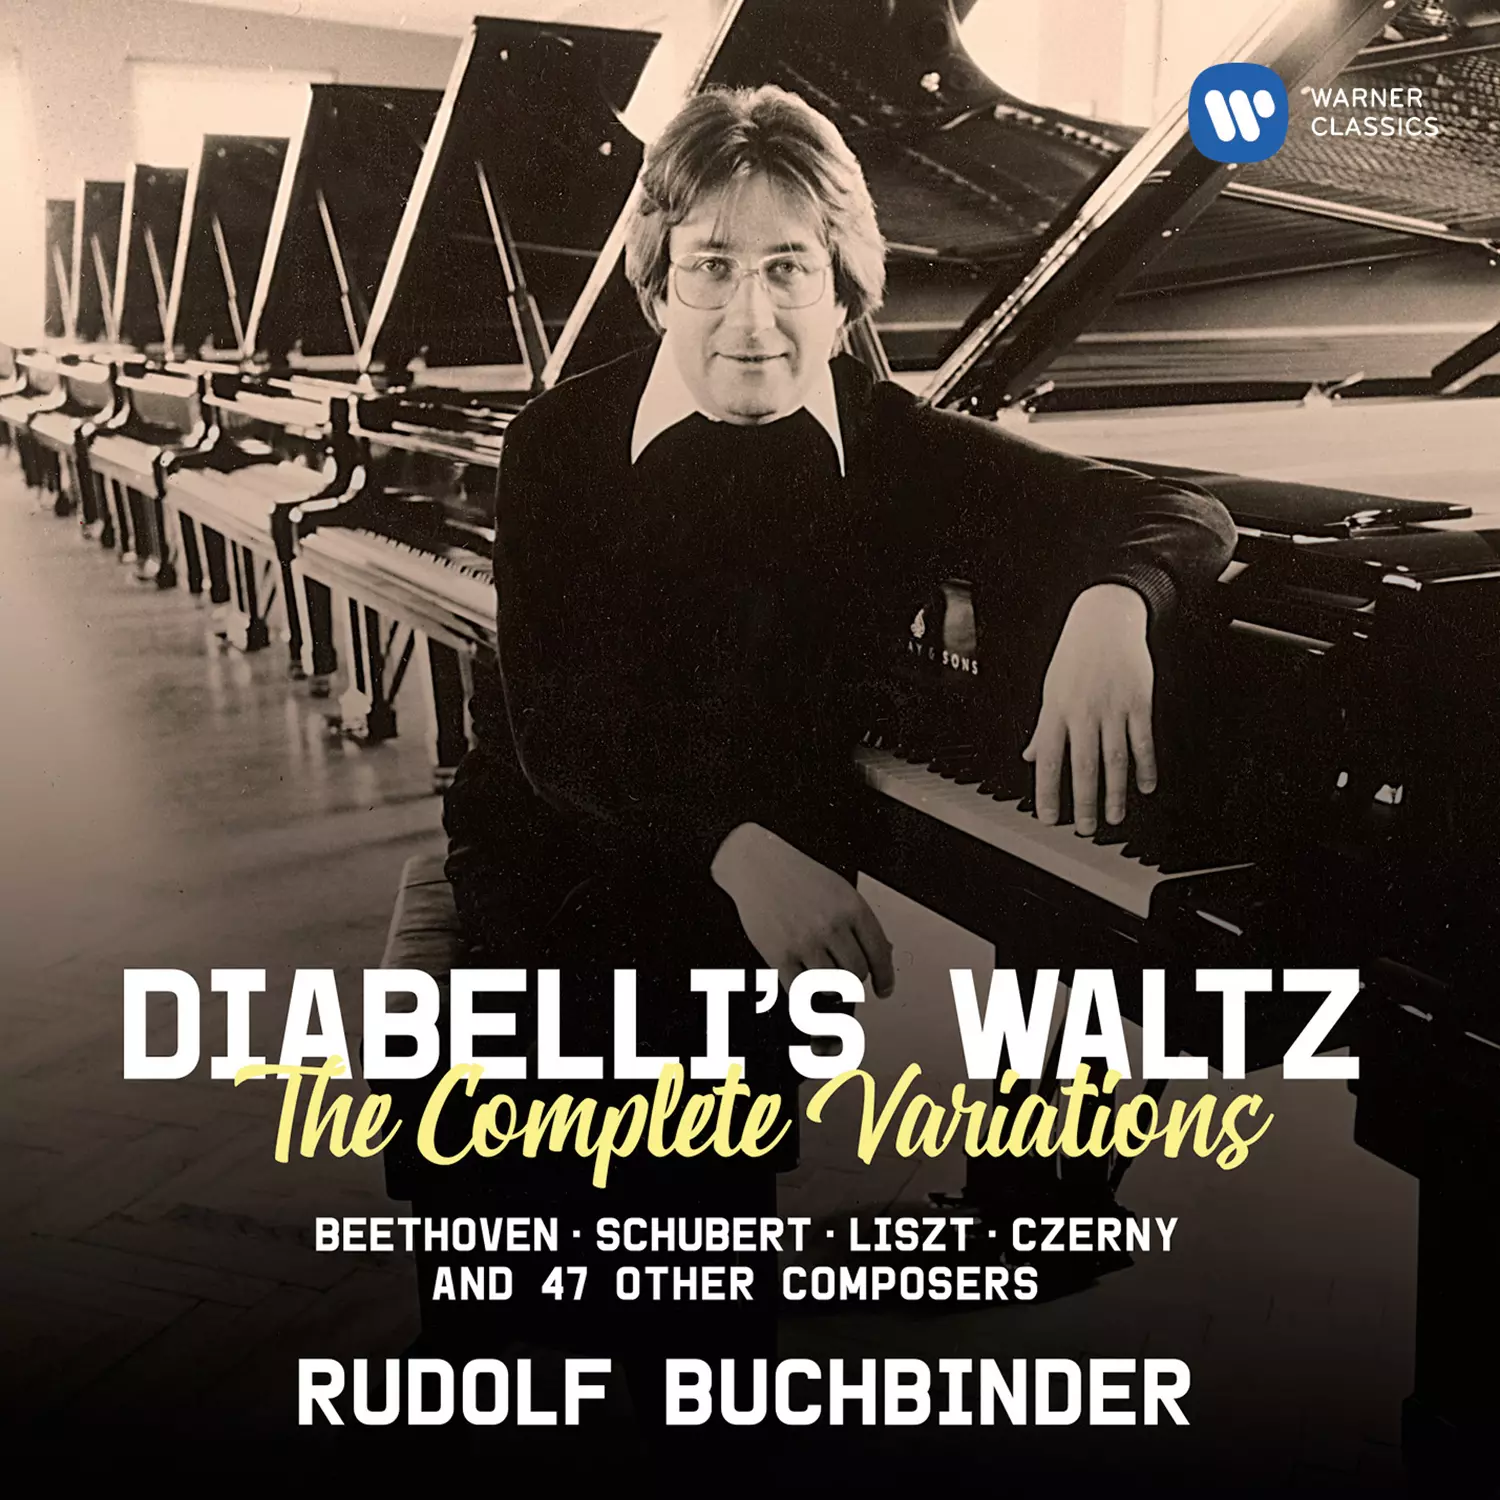 Diabelli’s Waltz: The Complete Variations